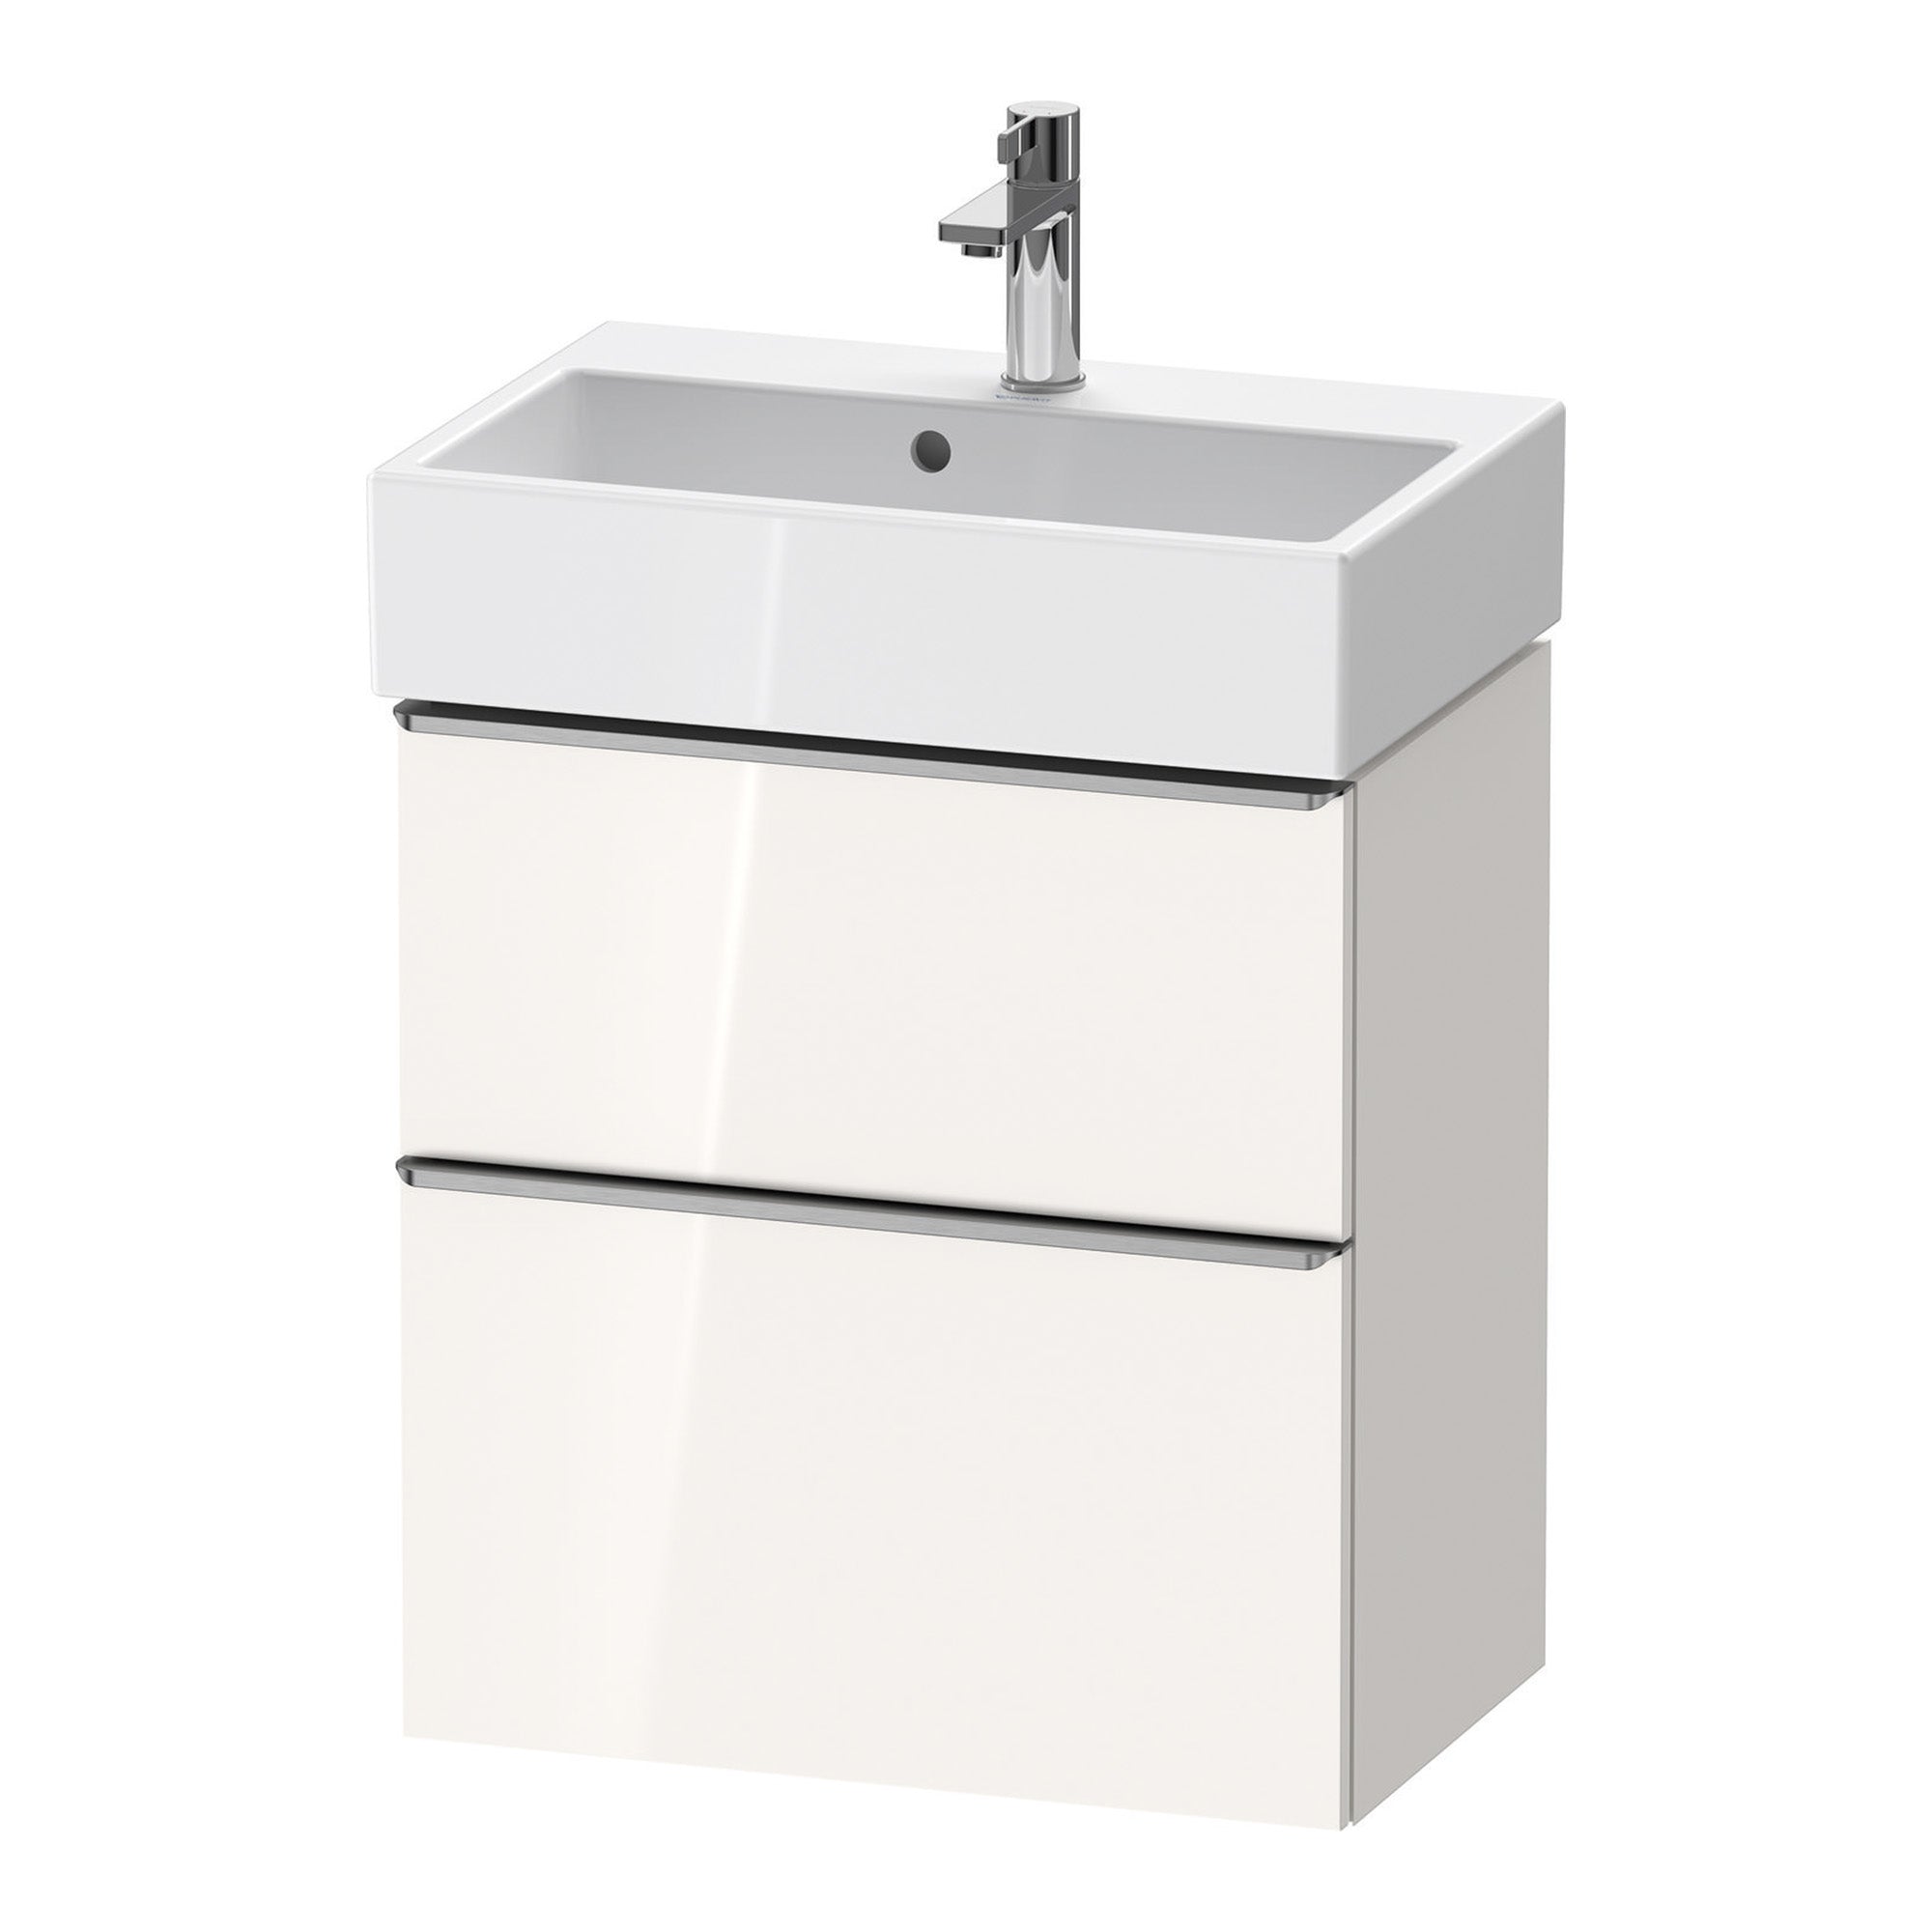 duravit d-neo 600 wall mounted vanity unit with vero basin white gloss stainless steel handles